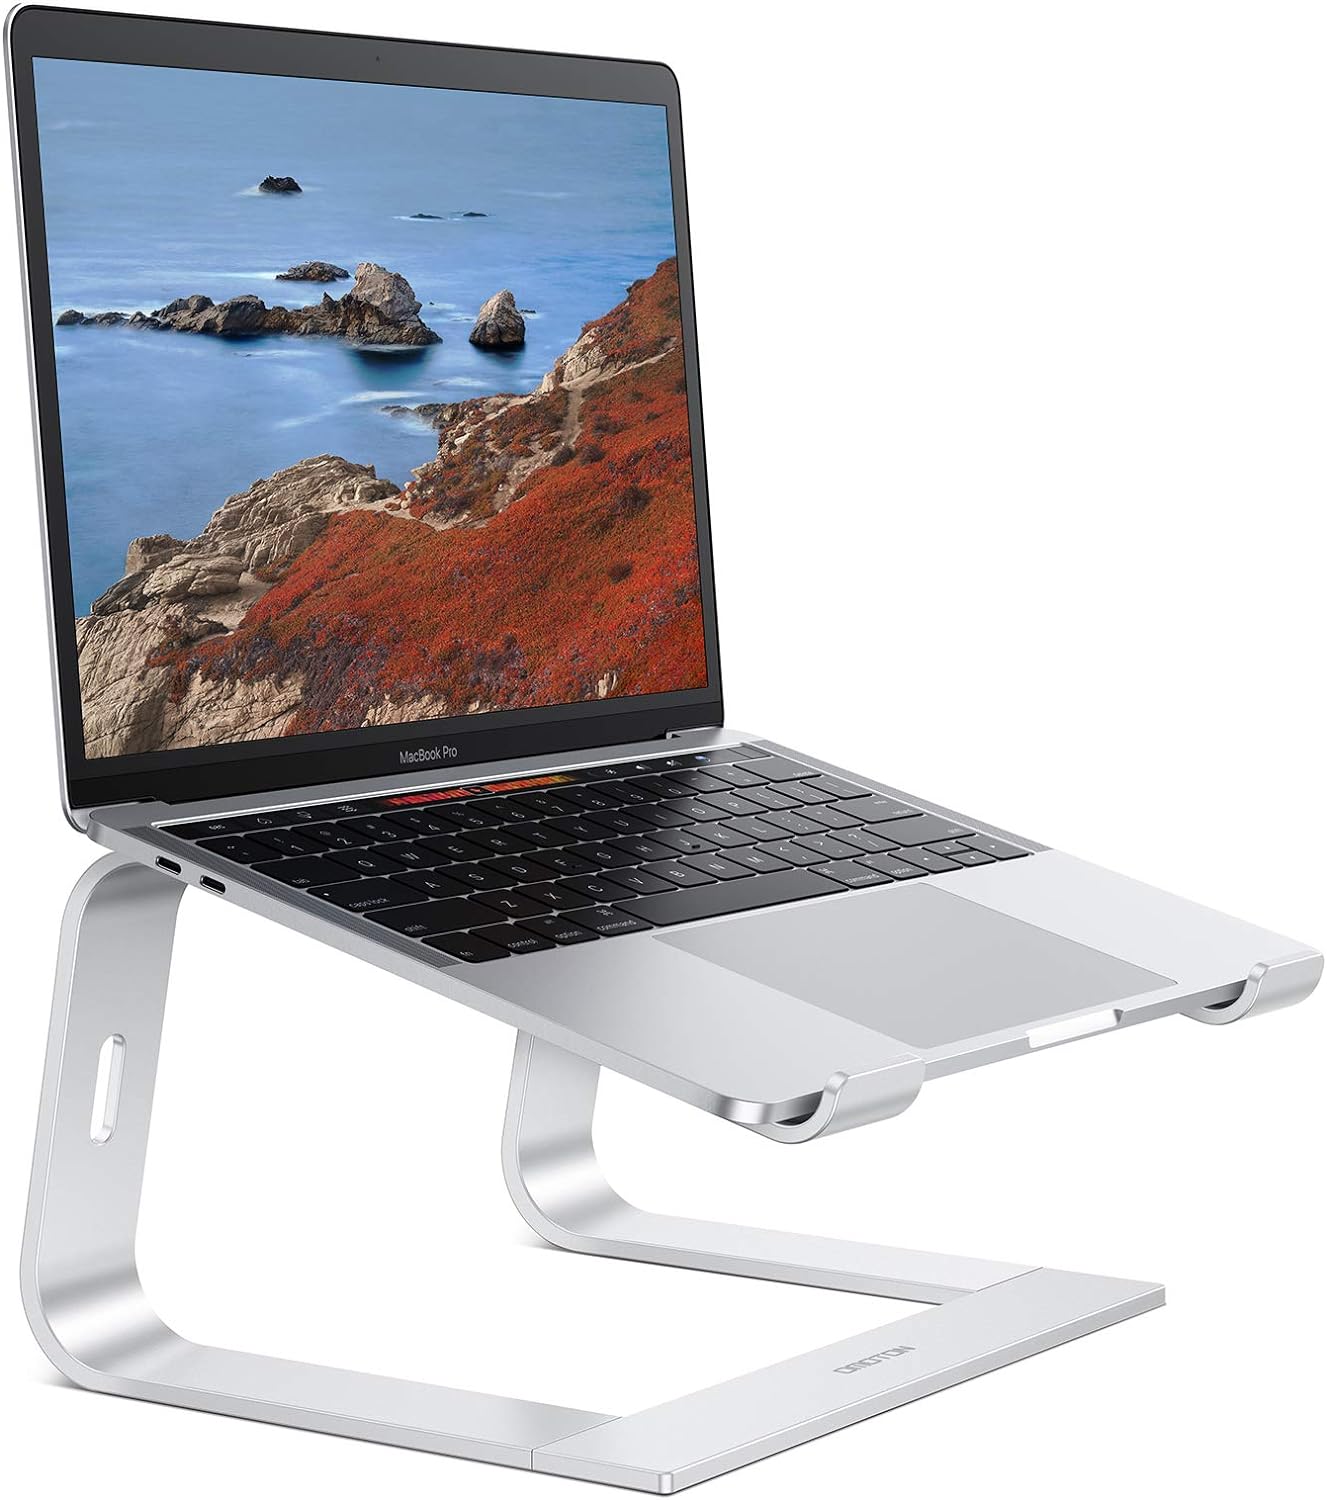 OMOTON Laptop Stand for Desk, Detachable Laptop Riser, Aluminum Laptop Holder, Compatible with MacBook Air/Pro, Dell, HP, and All Laptops (11-16 inch), Silver